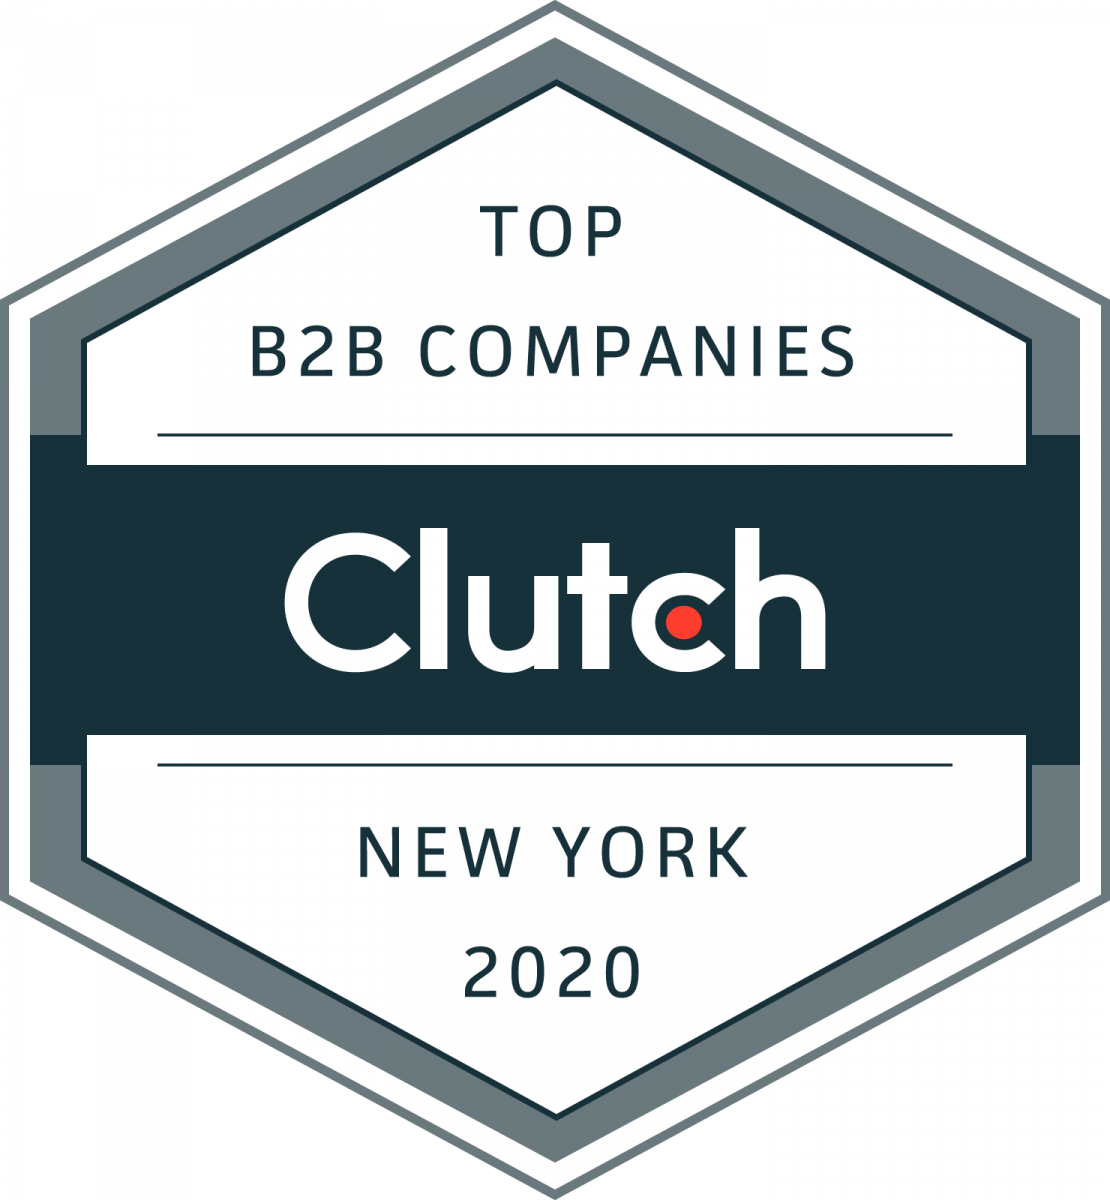 Clutch's digital badge for the top B2B in New York